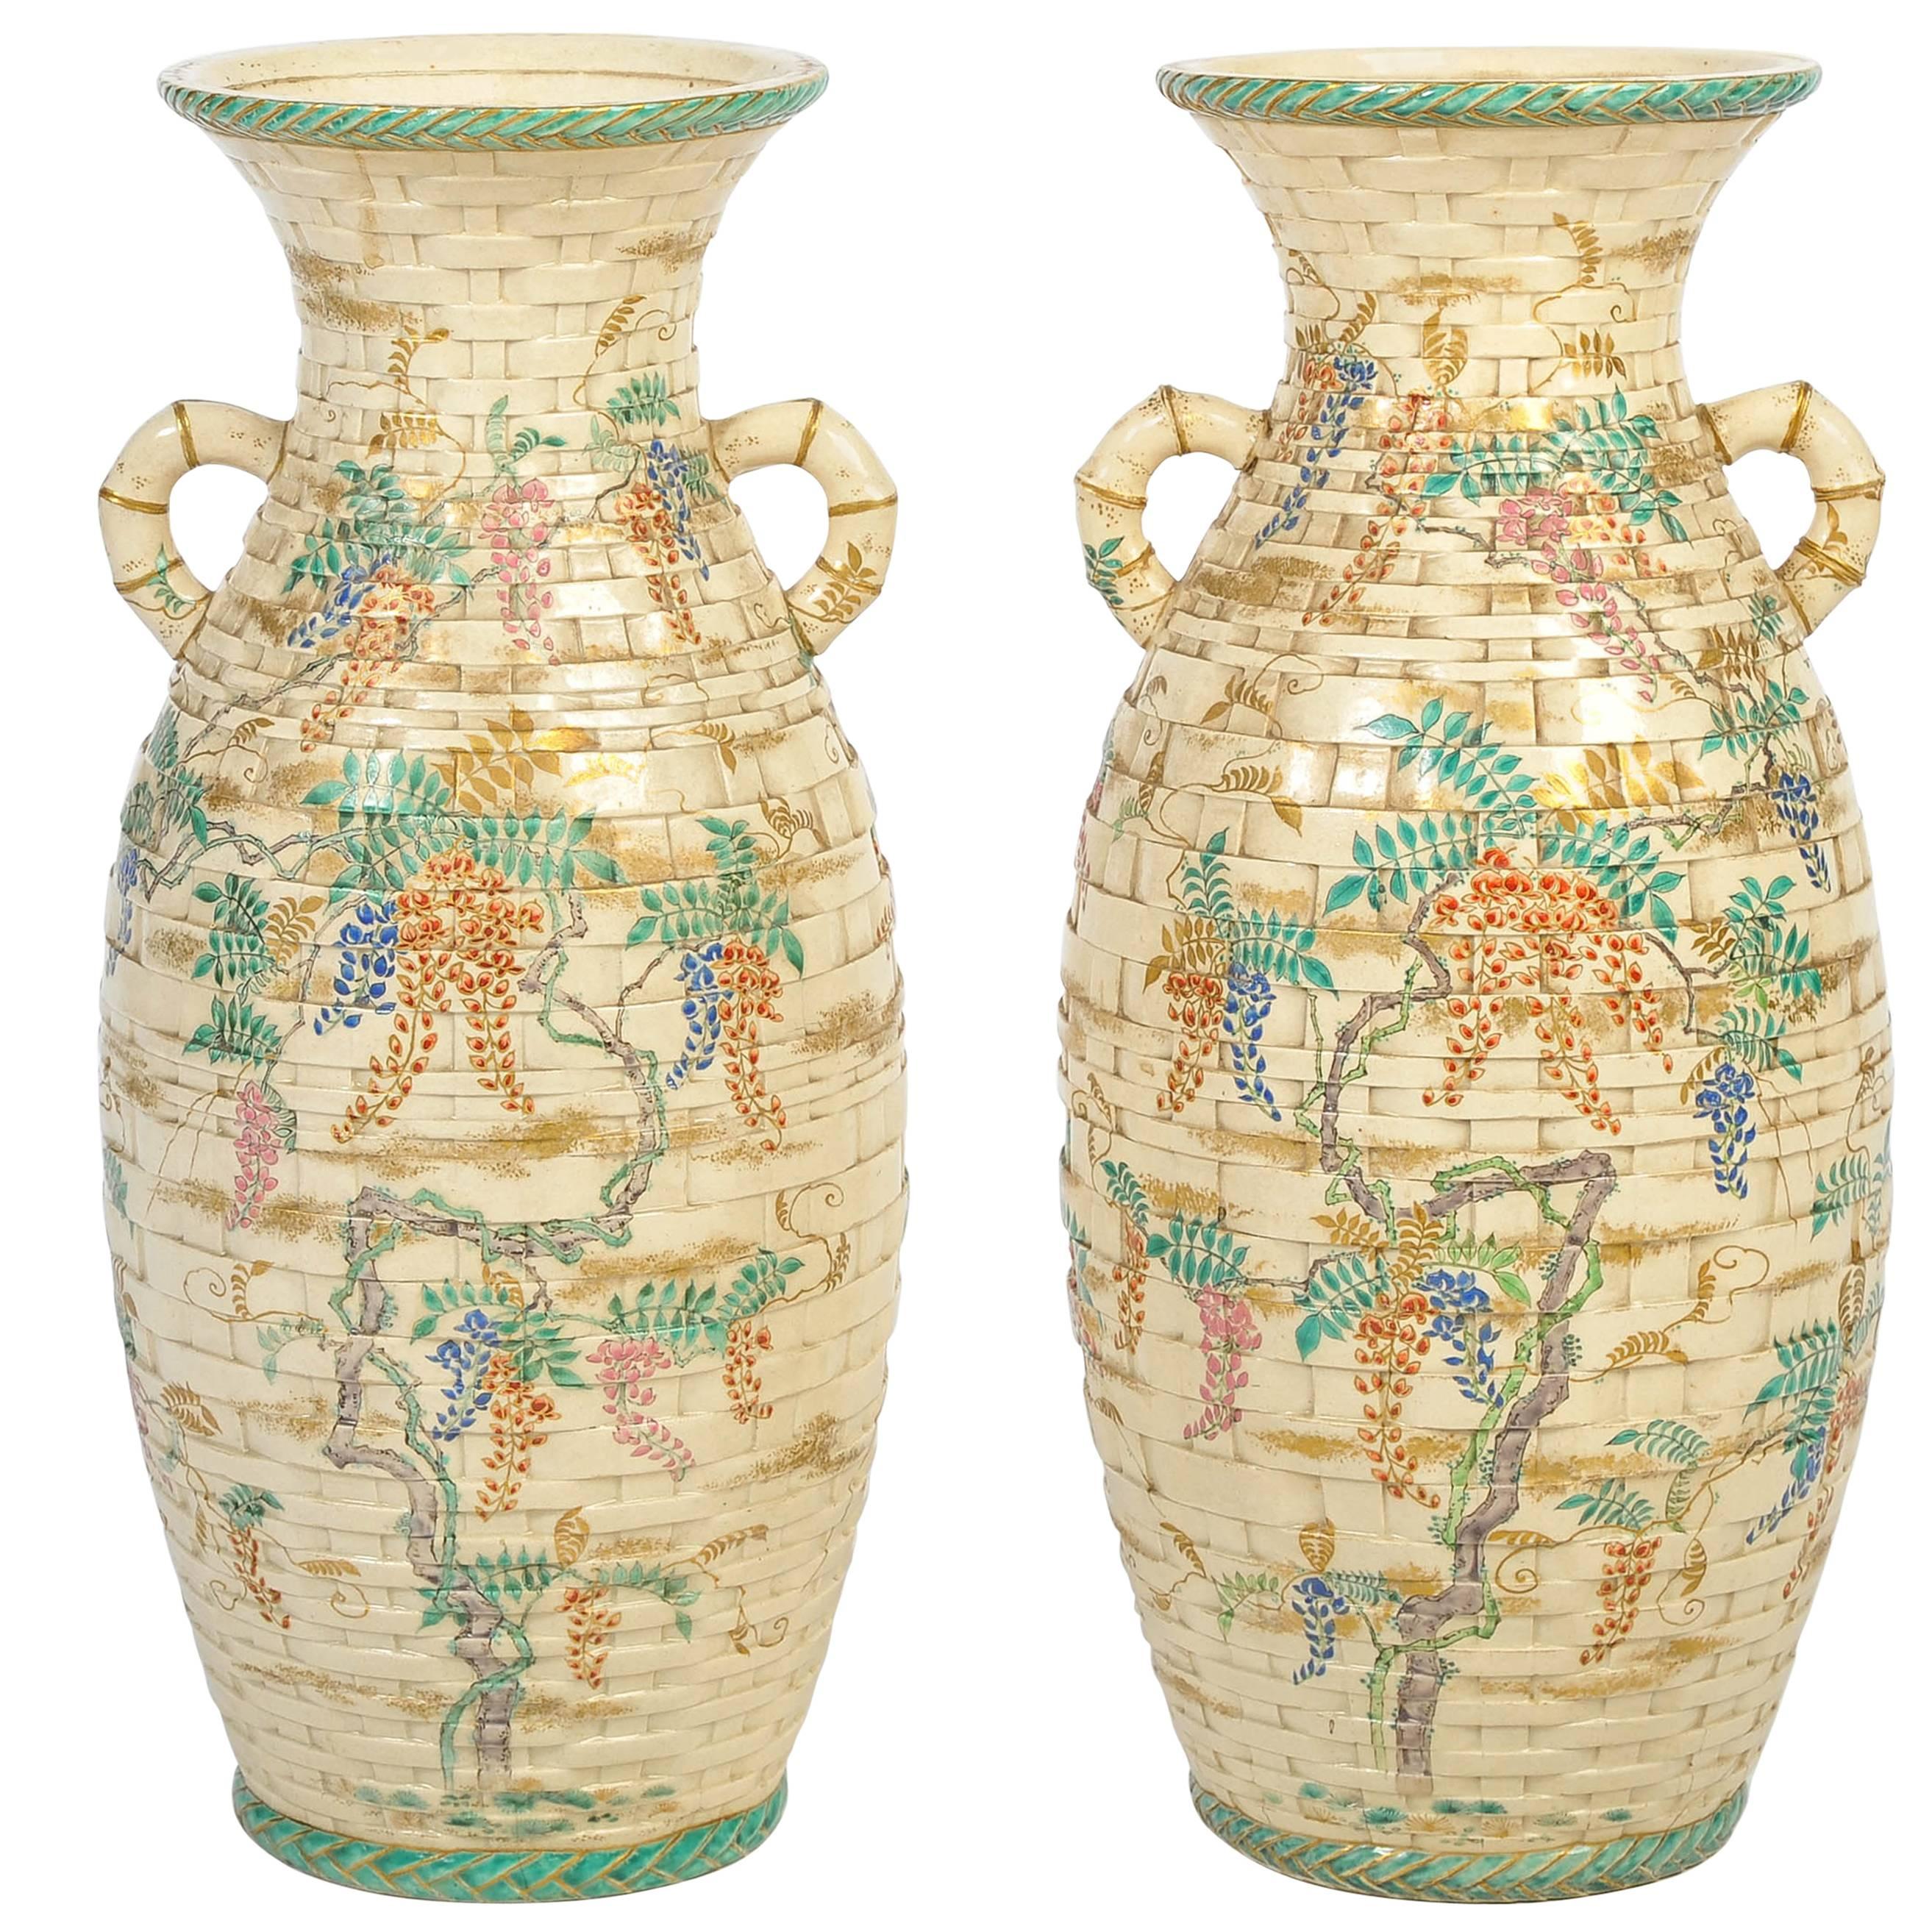 A very decorative pair of Japanese Satsuma vases, having a faux basket weave pattern with bamboo like handles and foliate painted decoration.
We can arrange of this pair of vases to be lamped if needs be, within the price.
 